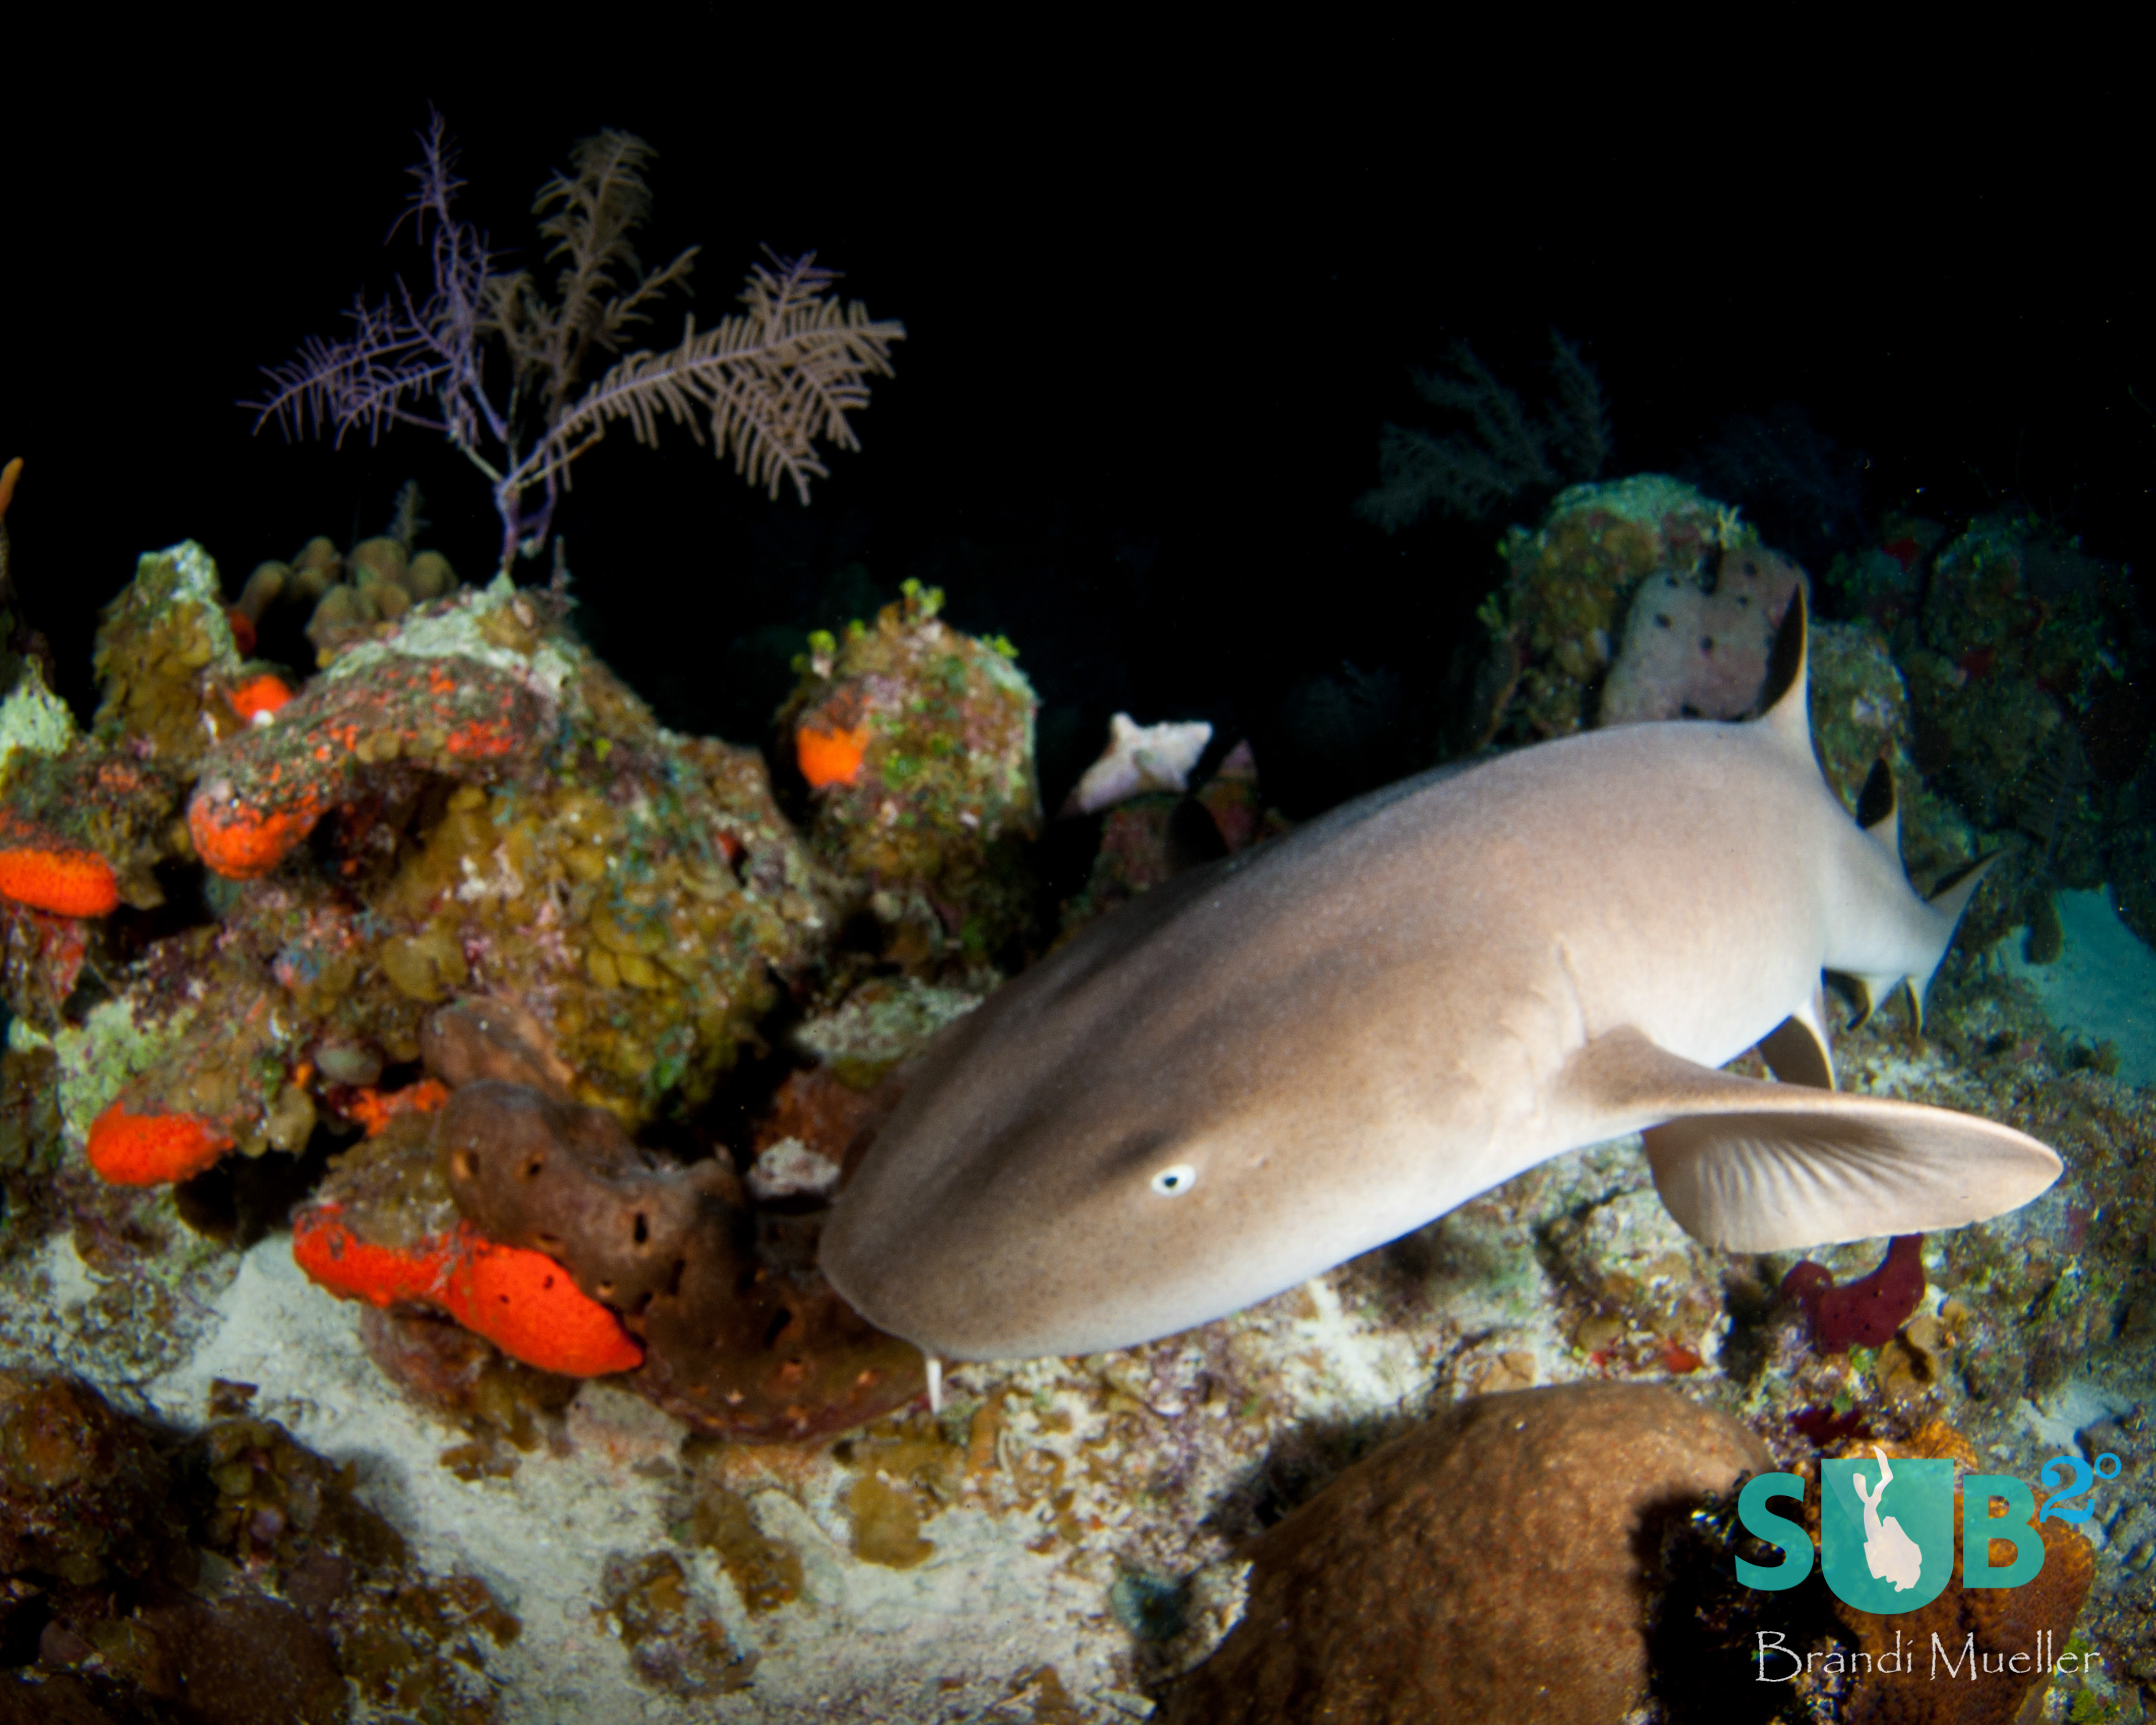 A nurse shark, which is usually inactive and hiding during the day, is seen on a night dive hunting out on the reef.